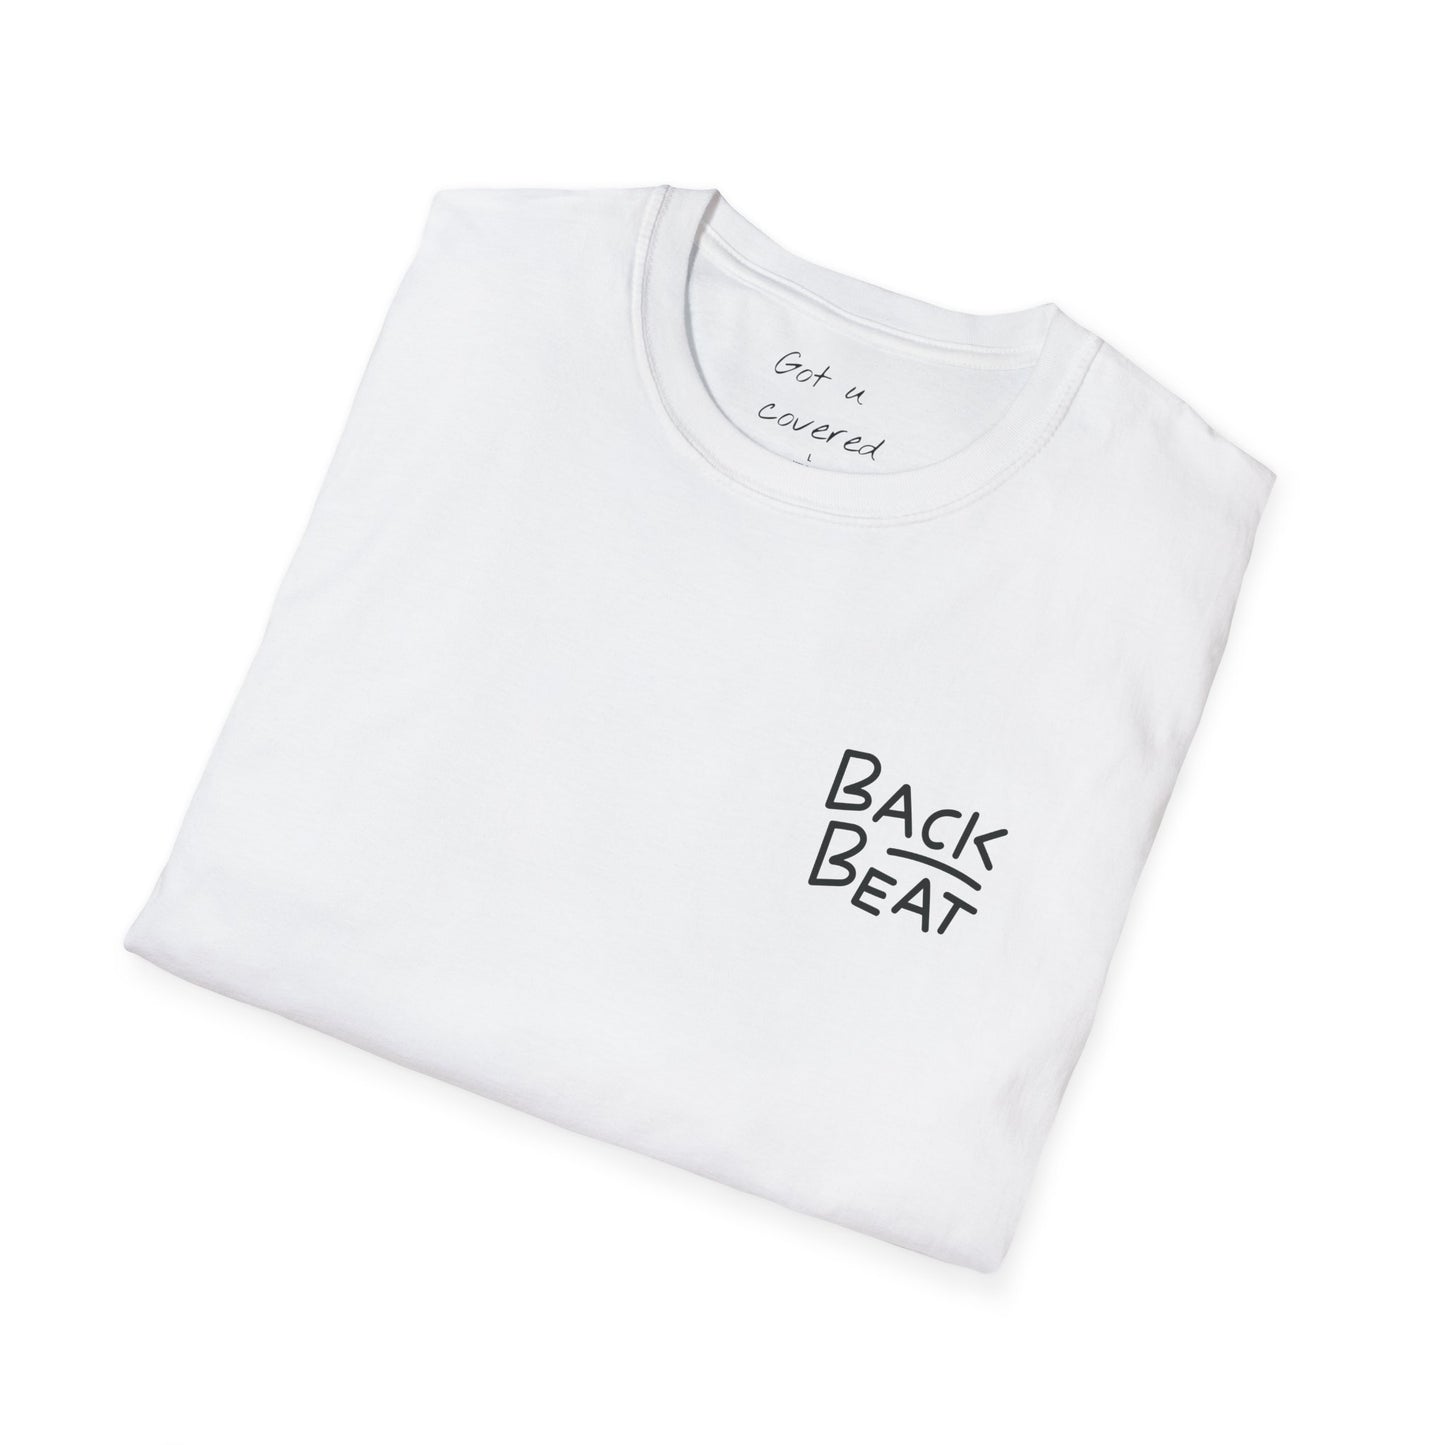 SOLD OUT Statement T-Shirt | Limited Edition | Backbeat Wear